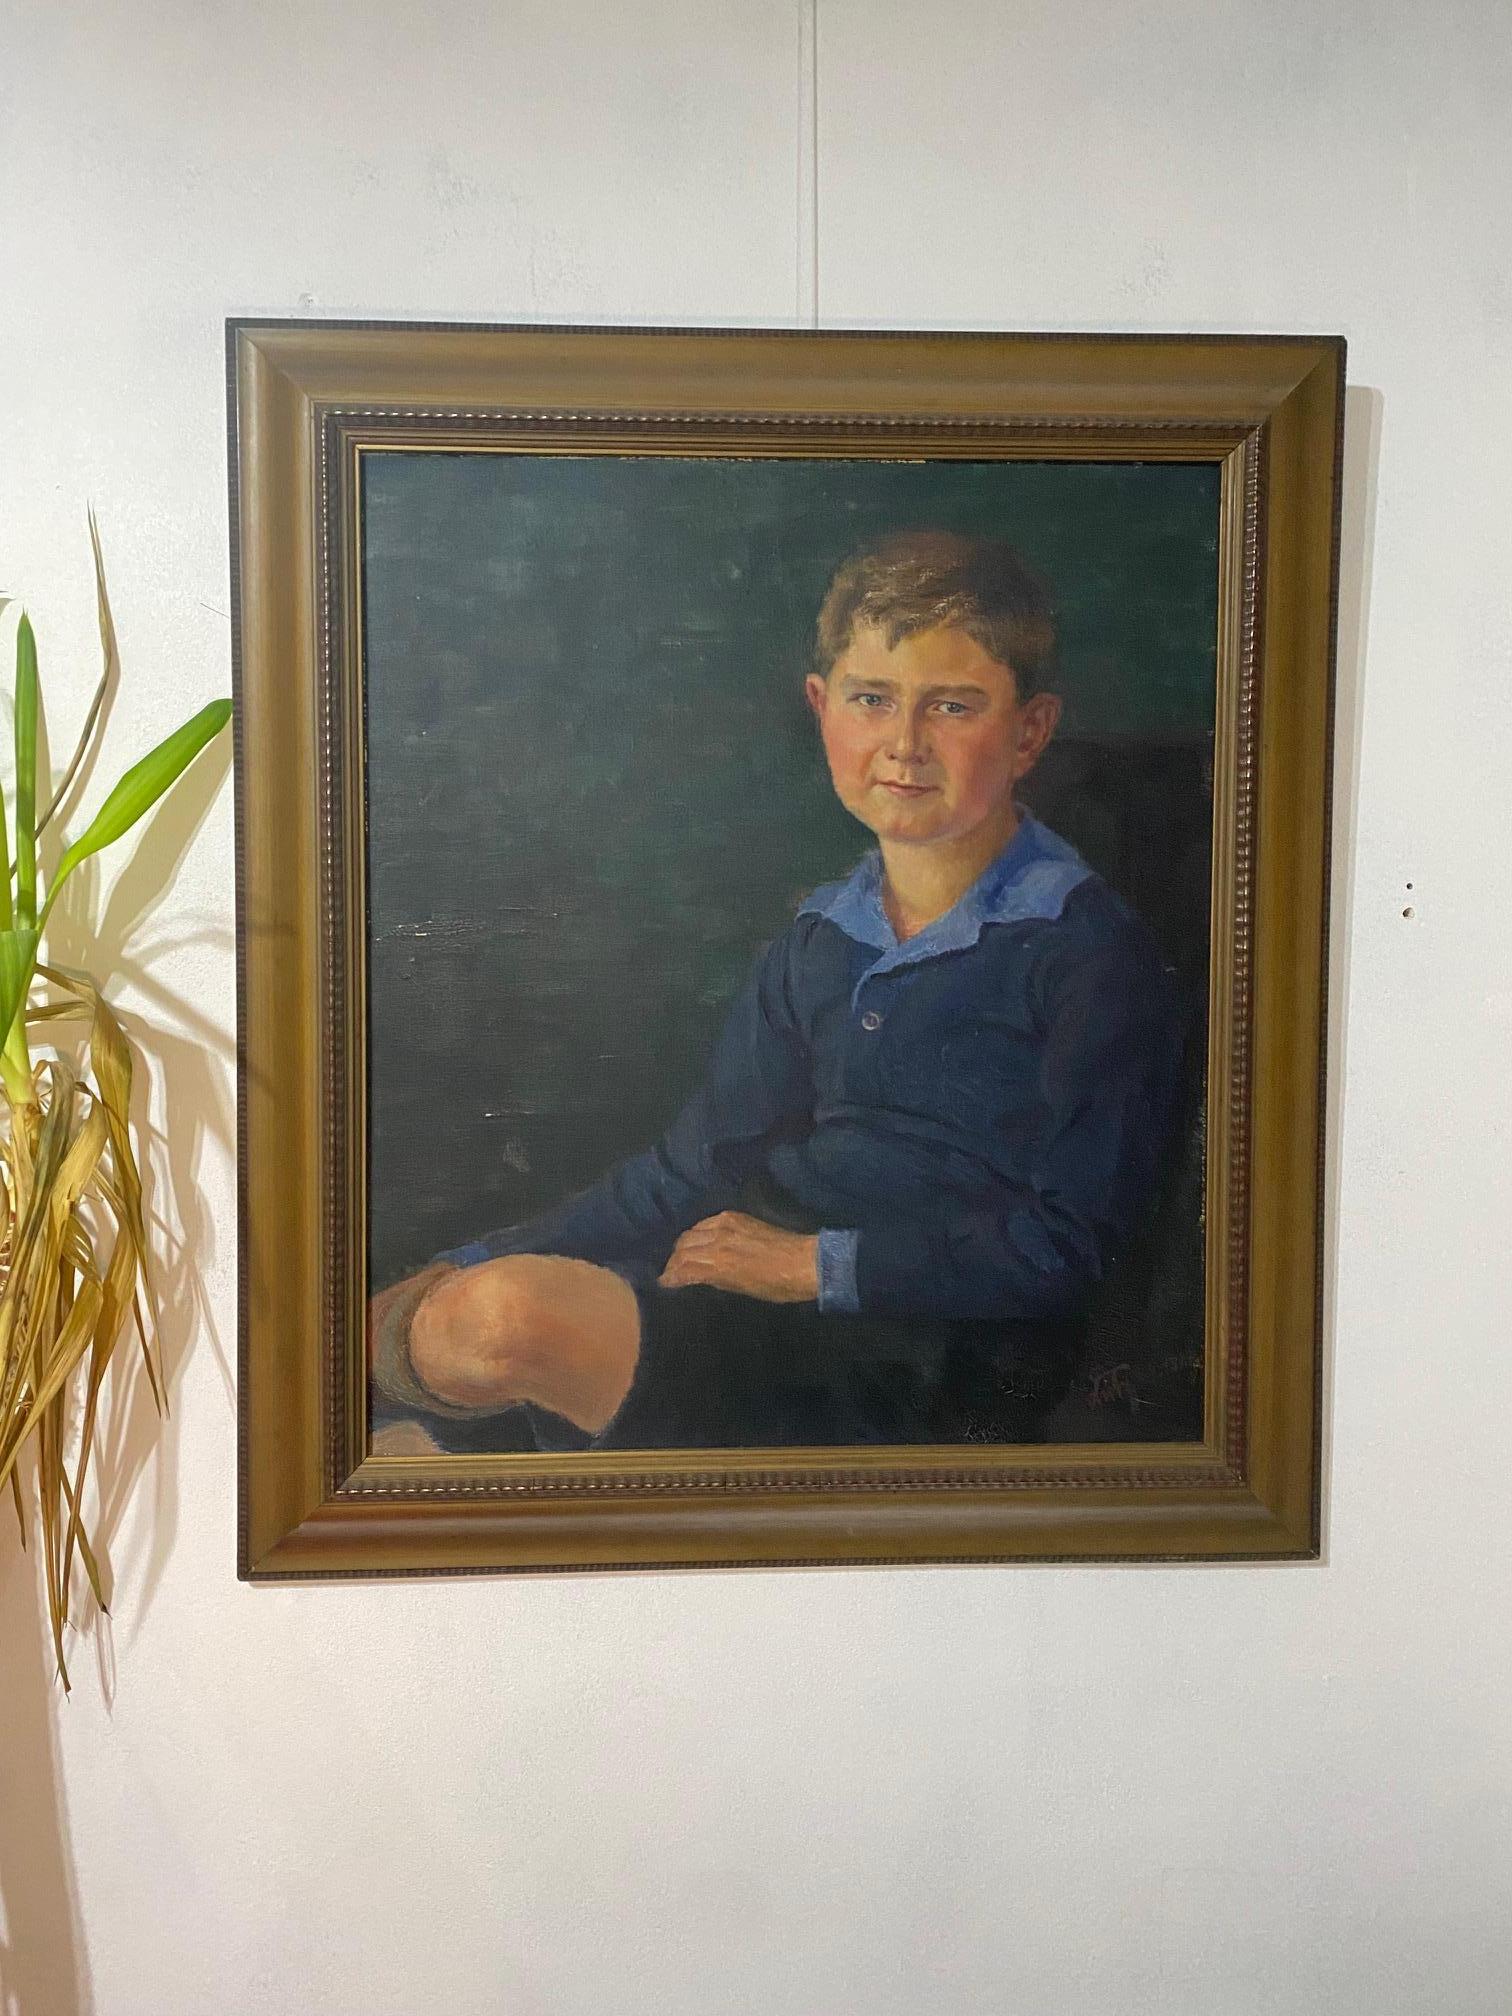 Young boy by Hannes Fritz-München - Oil on canvas 64x73 cm For Sale 2